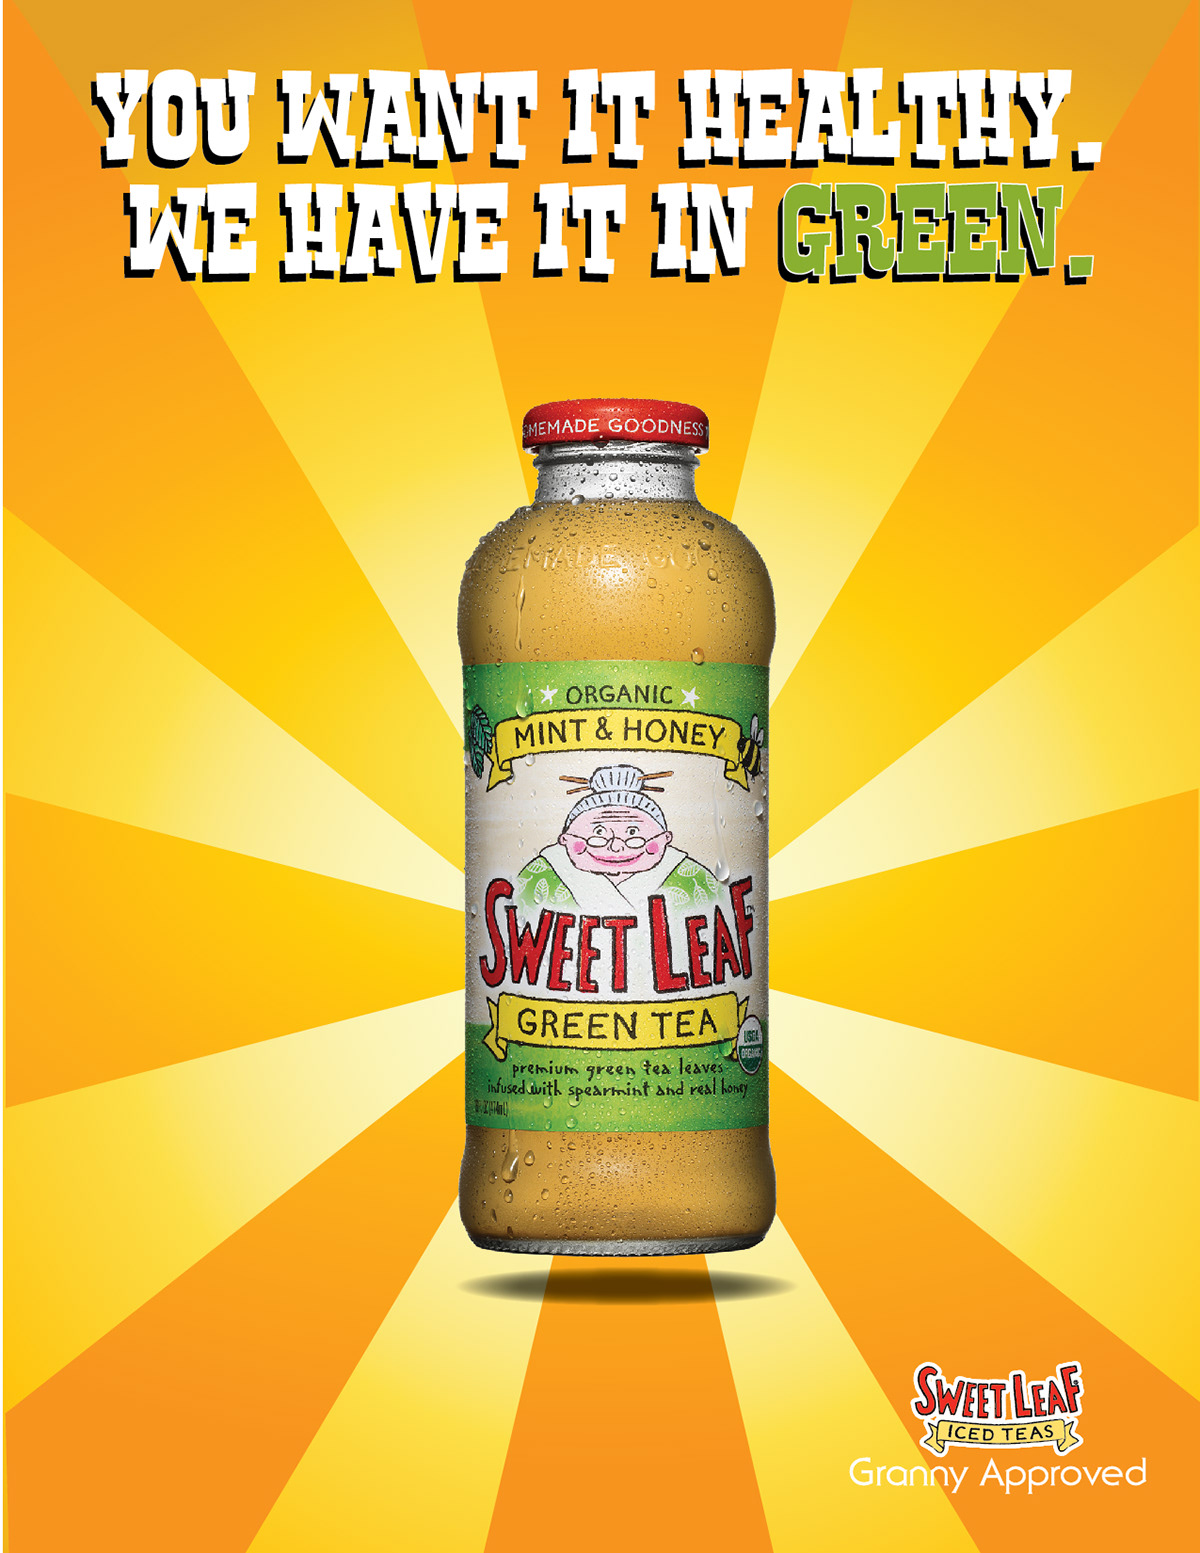 Sweet leaf tea text quote idea everyday daily type bram vanhaeren font poster print t-shirt update creative habbit movie Lyric Lyrics Freelance student Project month Calender journal journey january February march april 2011 2012 May june july august september october November December summer spring autumn winter ads ad campaign ad magazine Records photos photographys tea beverage drink